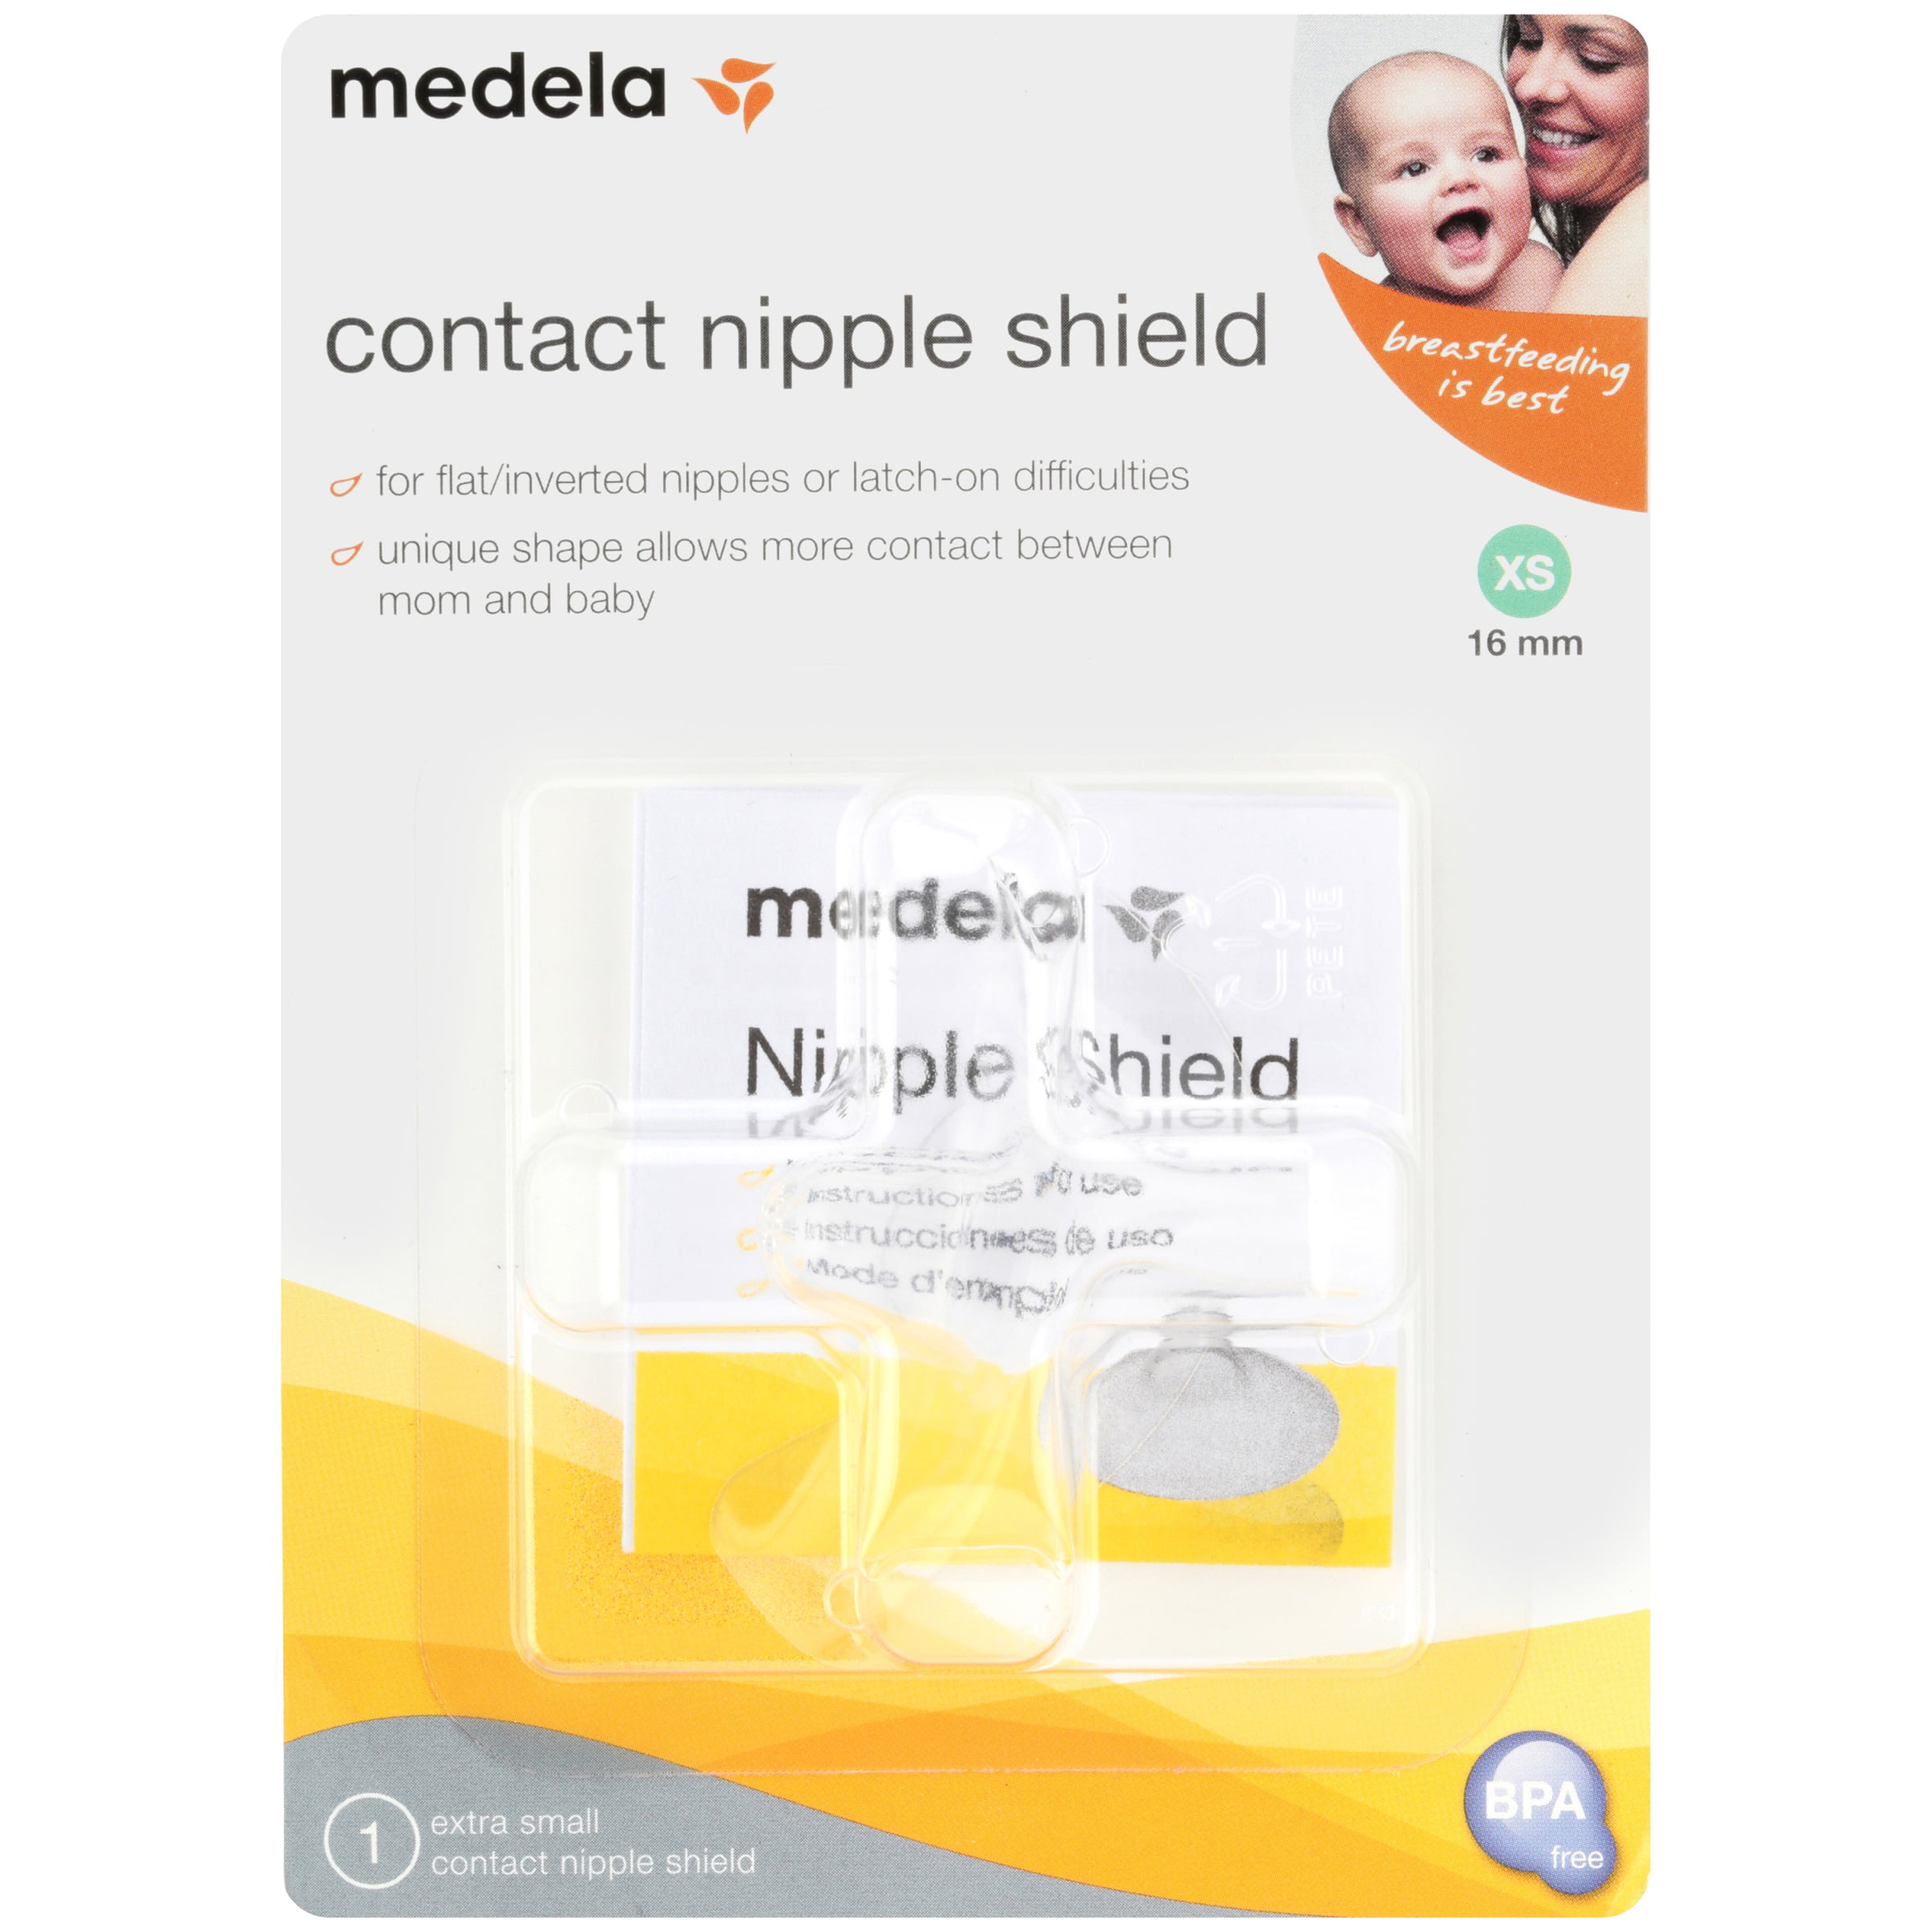 Small, 16mm nipple shield Medela 16 mm Contact Nipple Shields with Case 